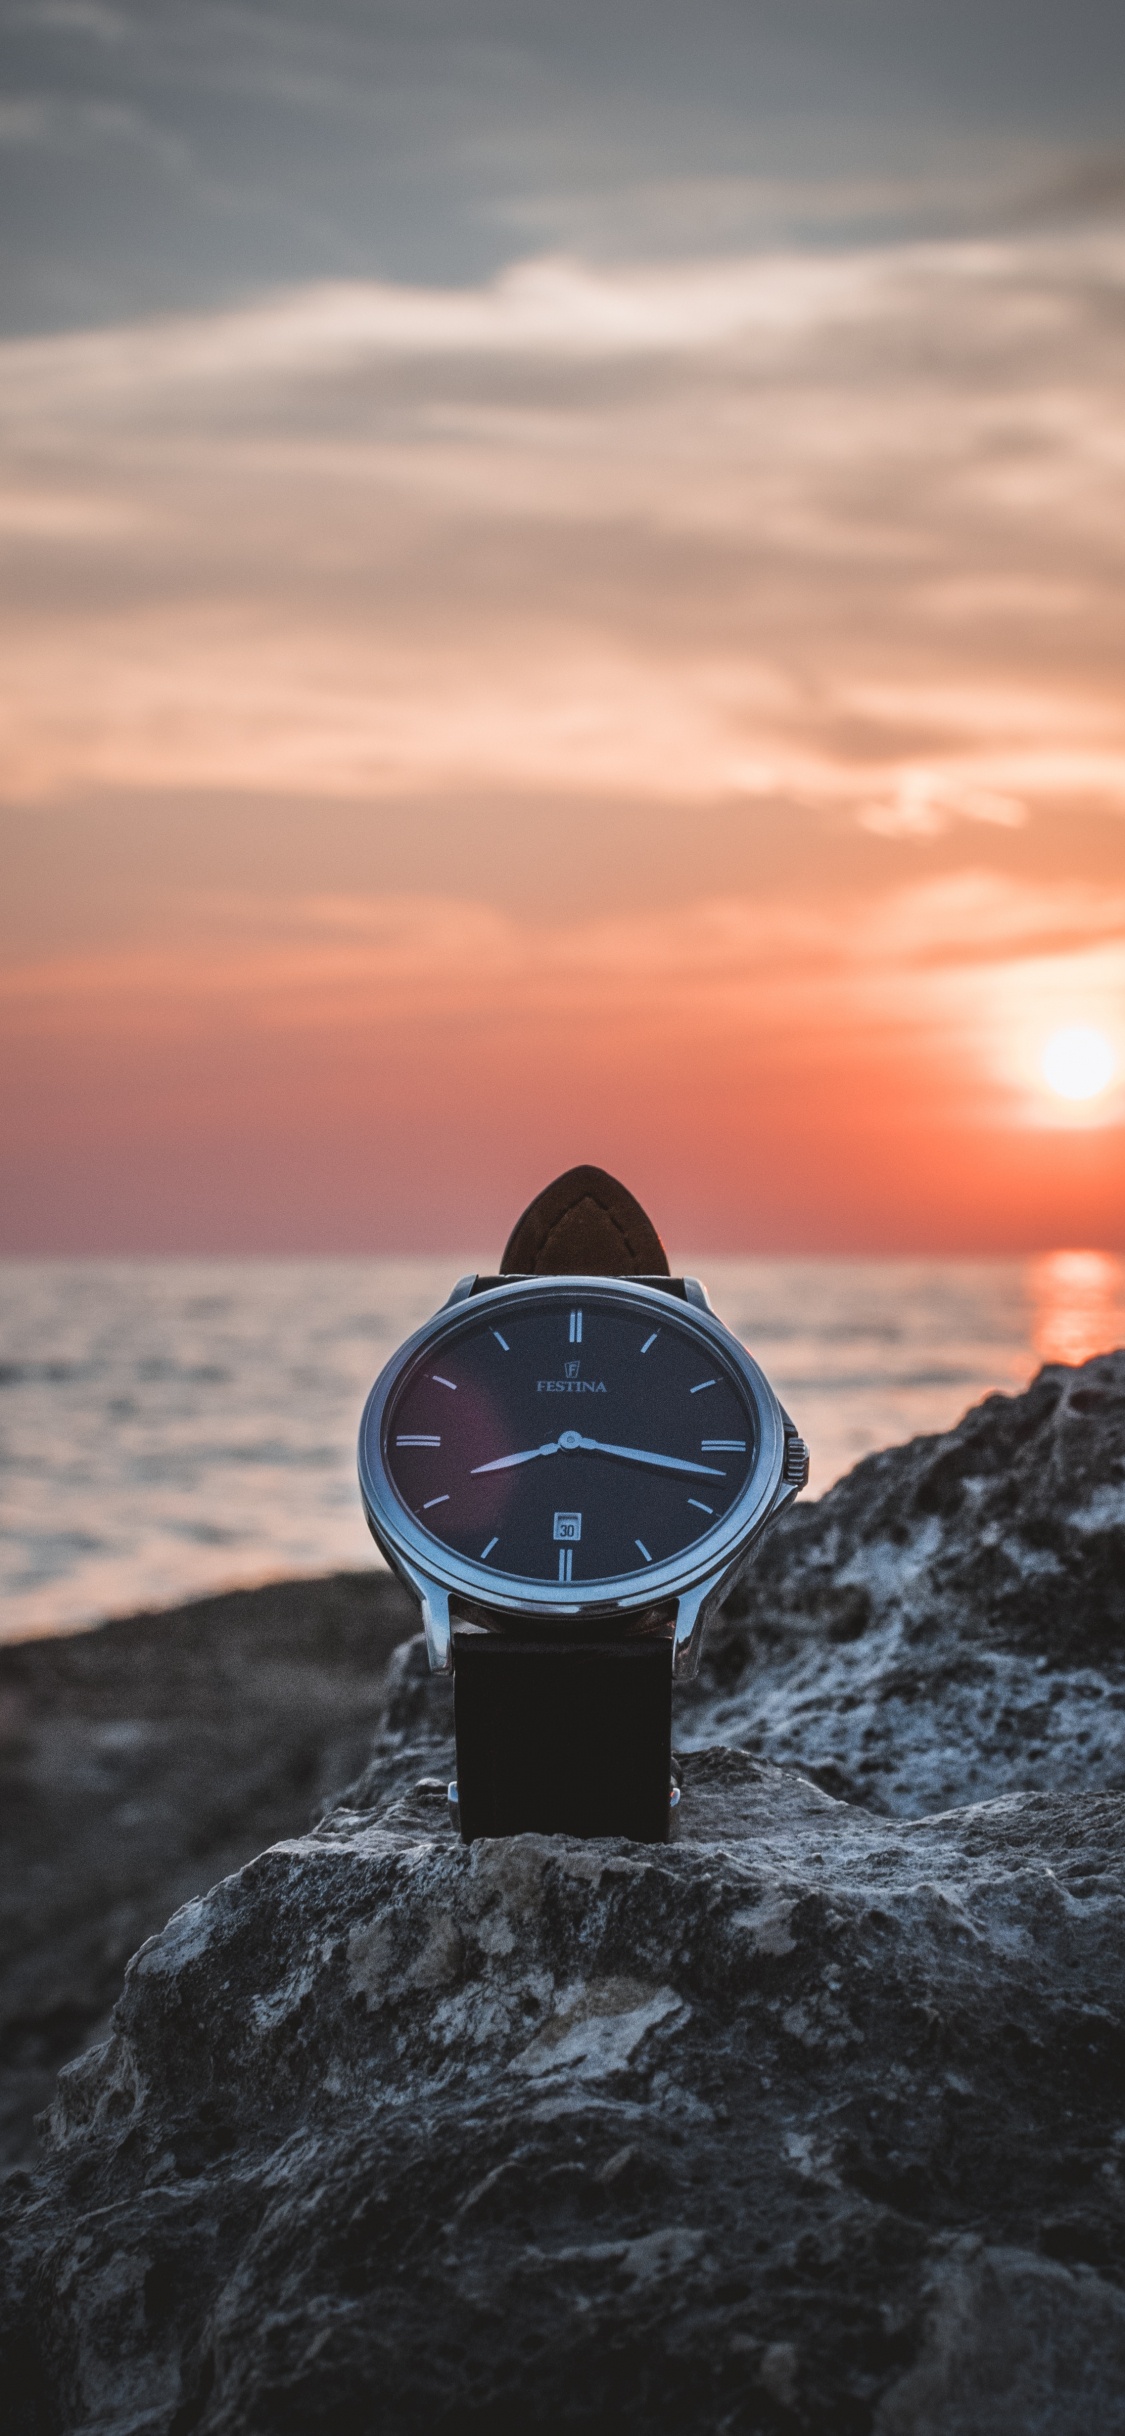 Black and White Analog Watch on Gray Rock Near Sea During Sunset. Wallpaper in 1125x2436 Resolution